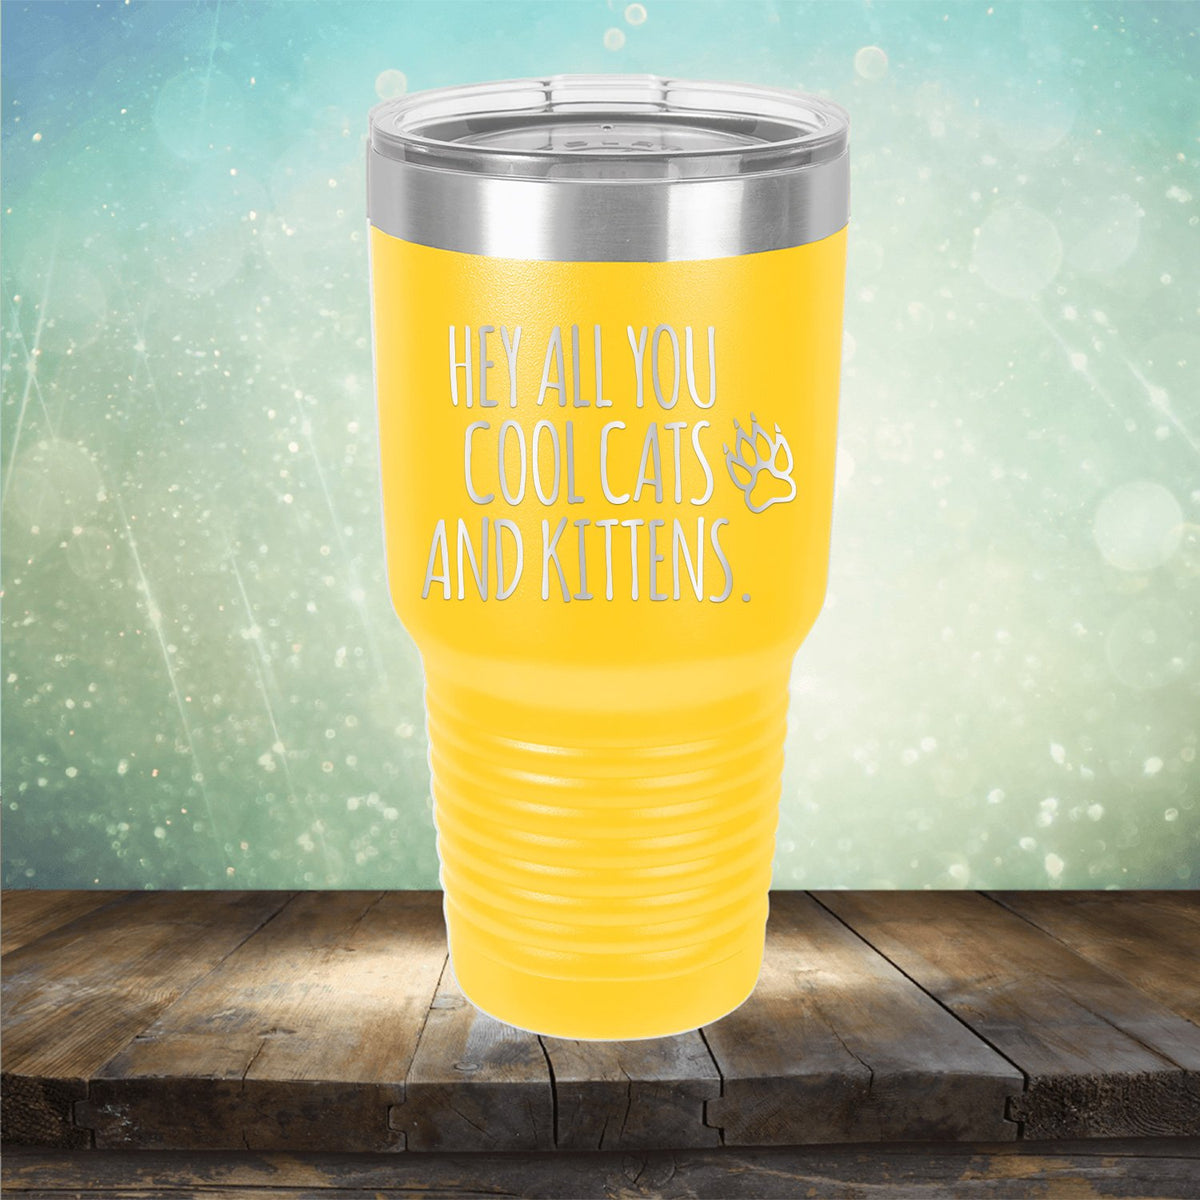 Hey All You Cool Cats and Kittens - Laser Etched Tumbler Mug